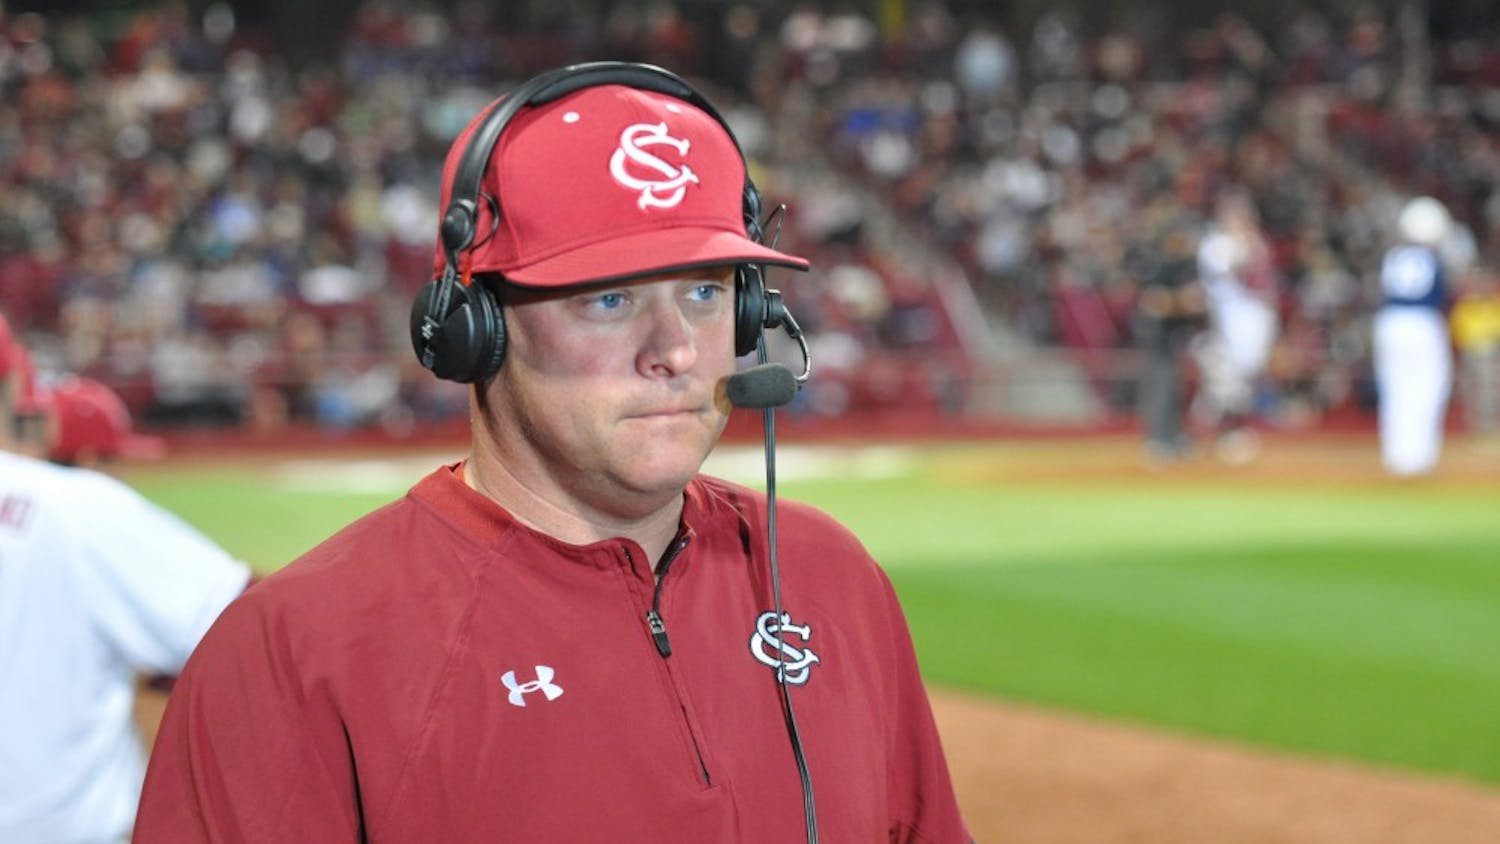 	In his first season as head coach, Chad Holbrook took the Gamecocks one game short of a College World Series appearance. He looks to expand on that success in year-two.